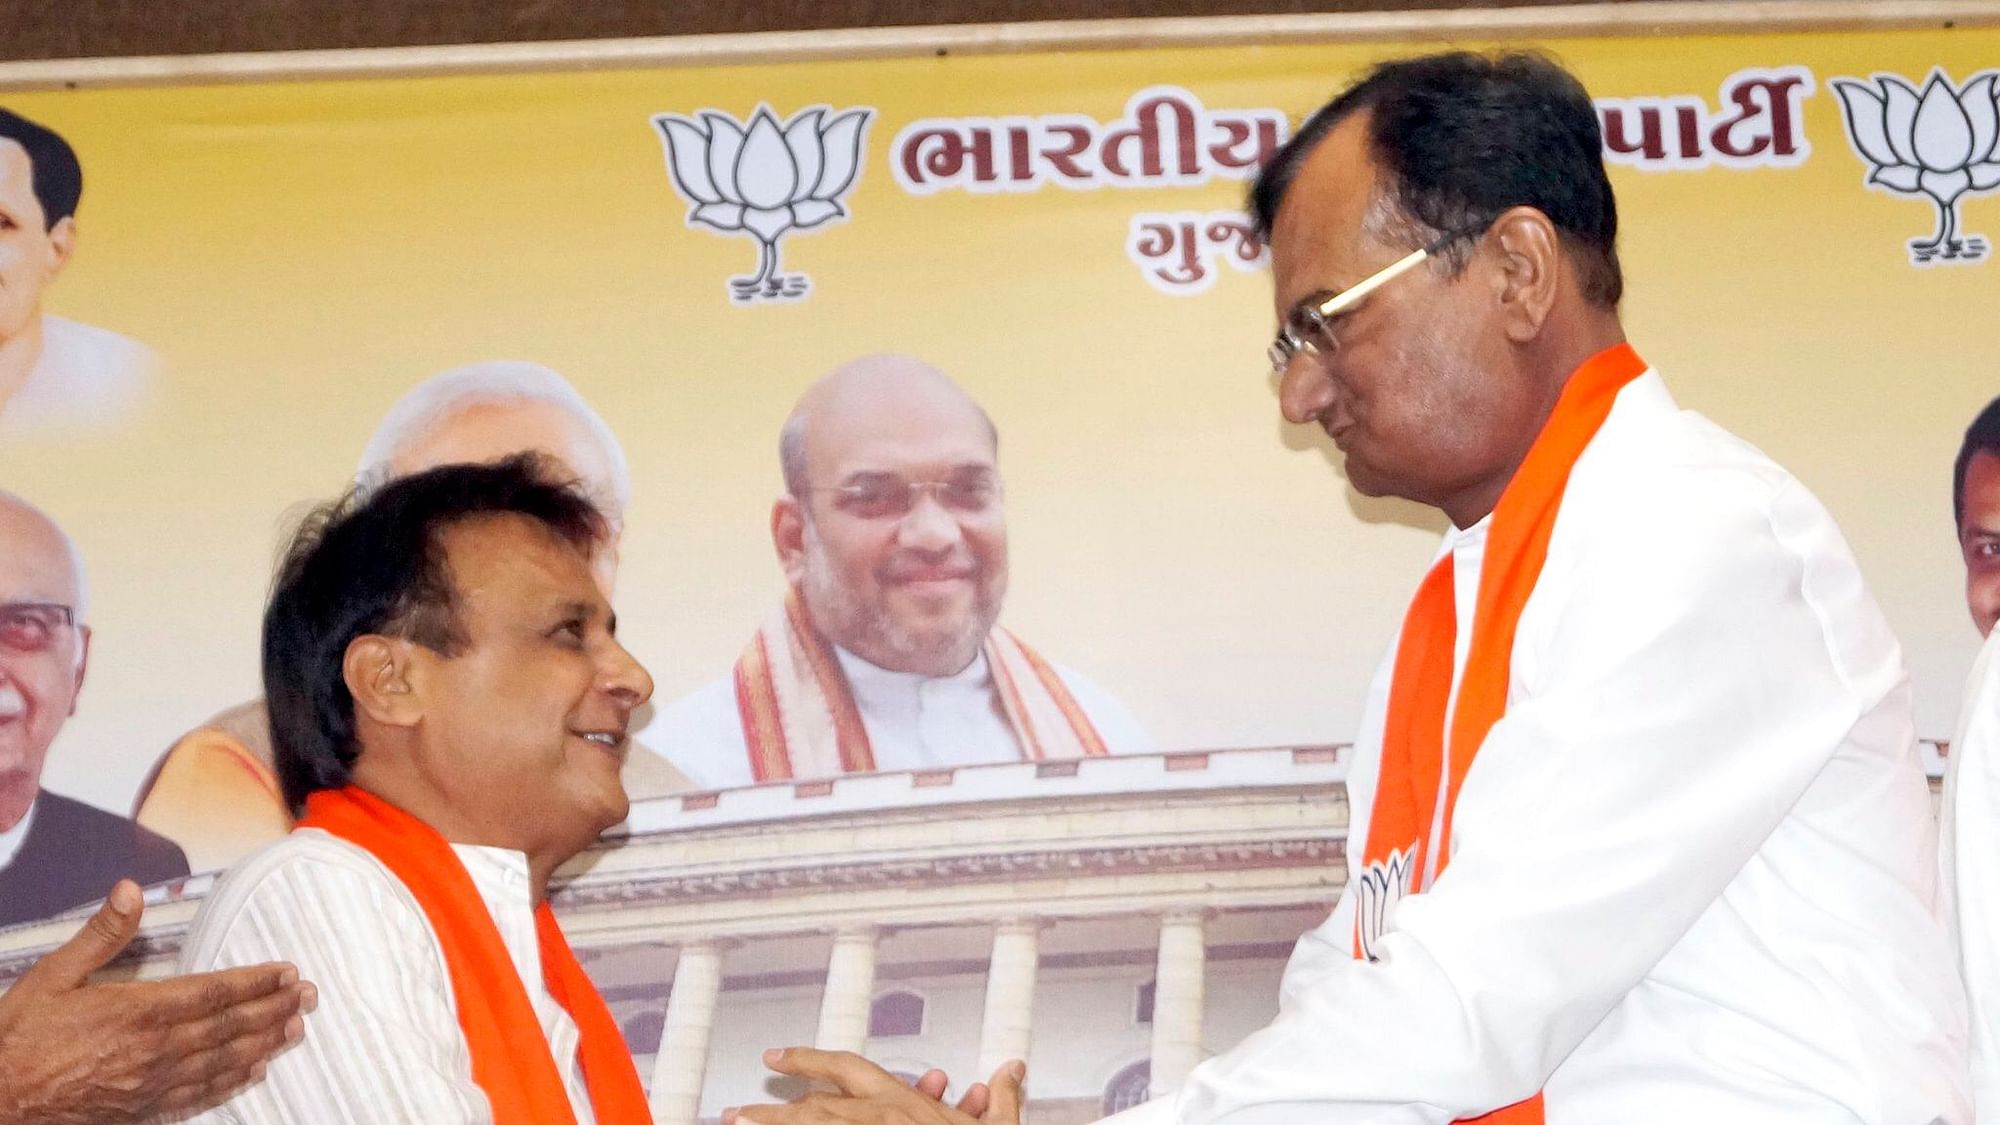 Former Gujarat MLA Jawahar Chavda (left) joins the BJP after quitting the Congress party. He is welcomed to the party by Minister of State for Home Pradipsinh Jadeja.